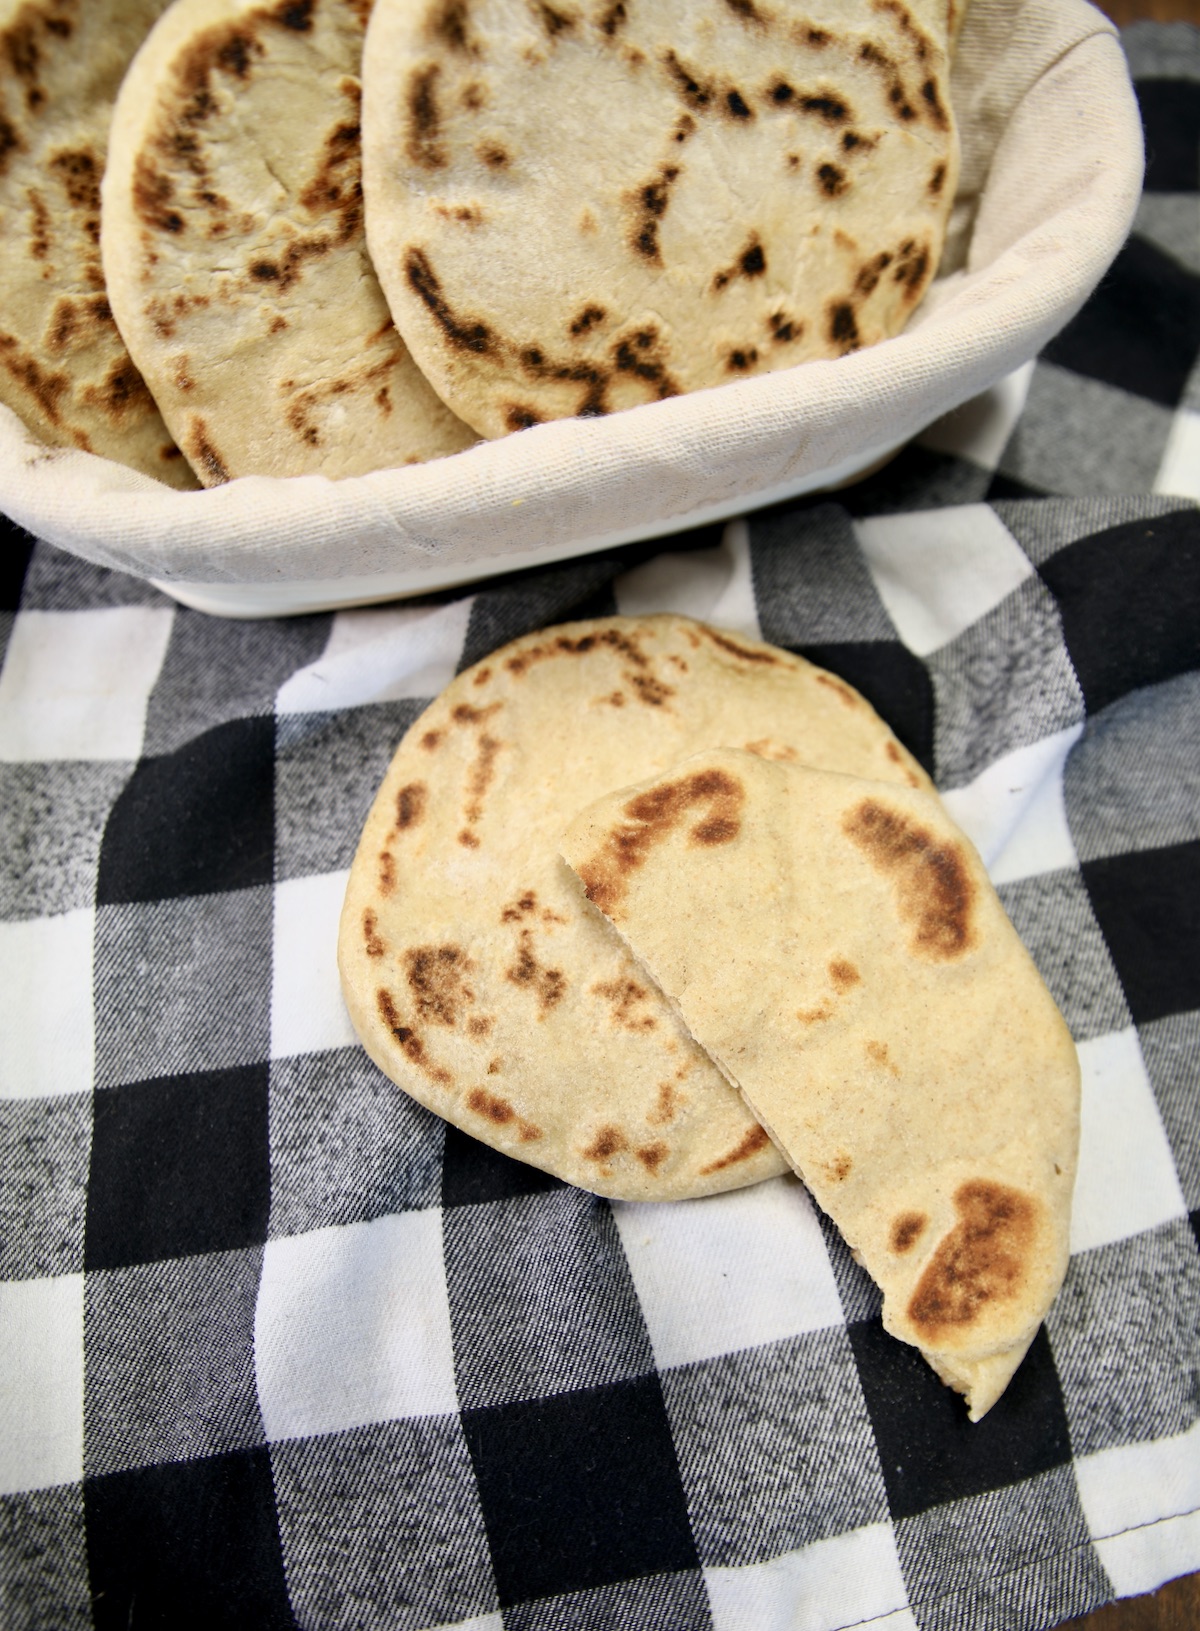 Basket of pita bread, with  one on a napkin and one cut in half.